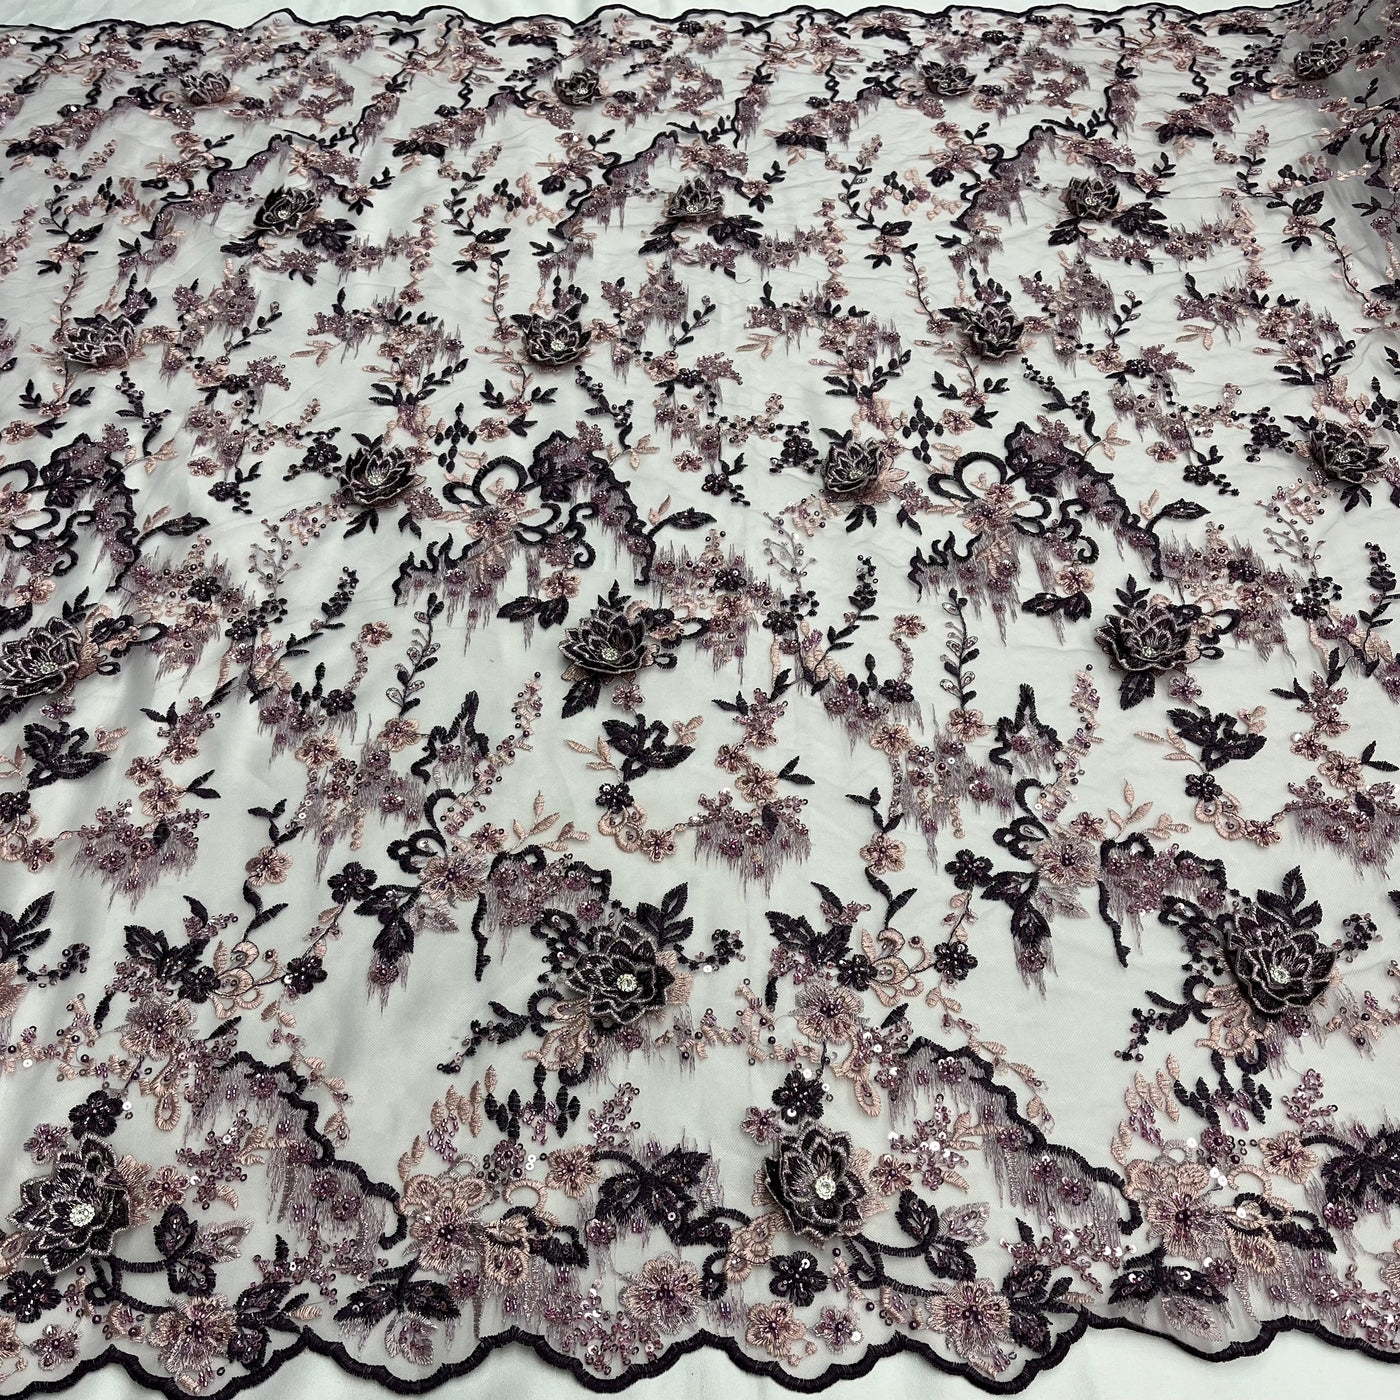 Beaded & Rhinestone 3D Floral Lace Fabric Embroidered on 100% Polyester Net Mesh | Lace USA